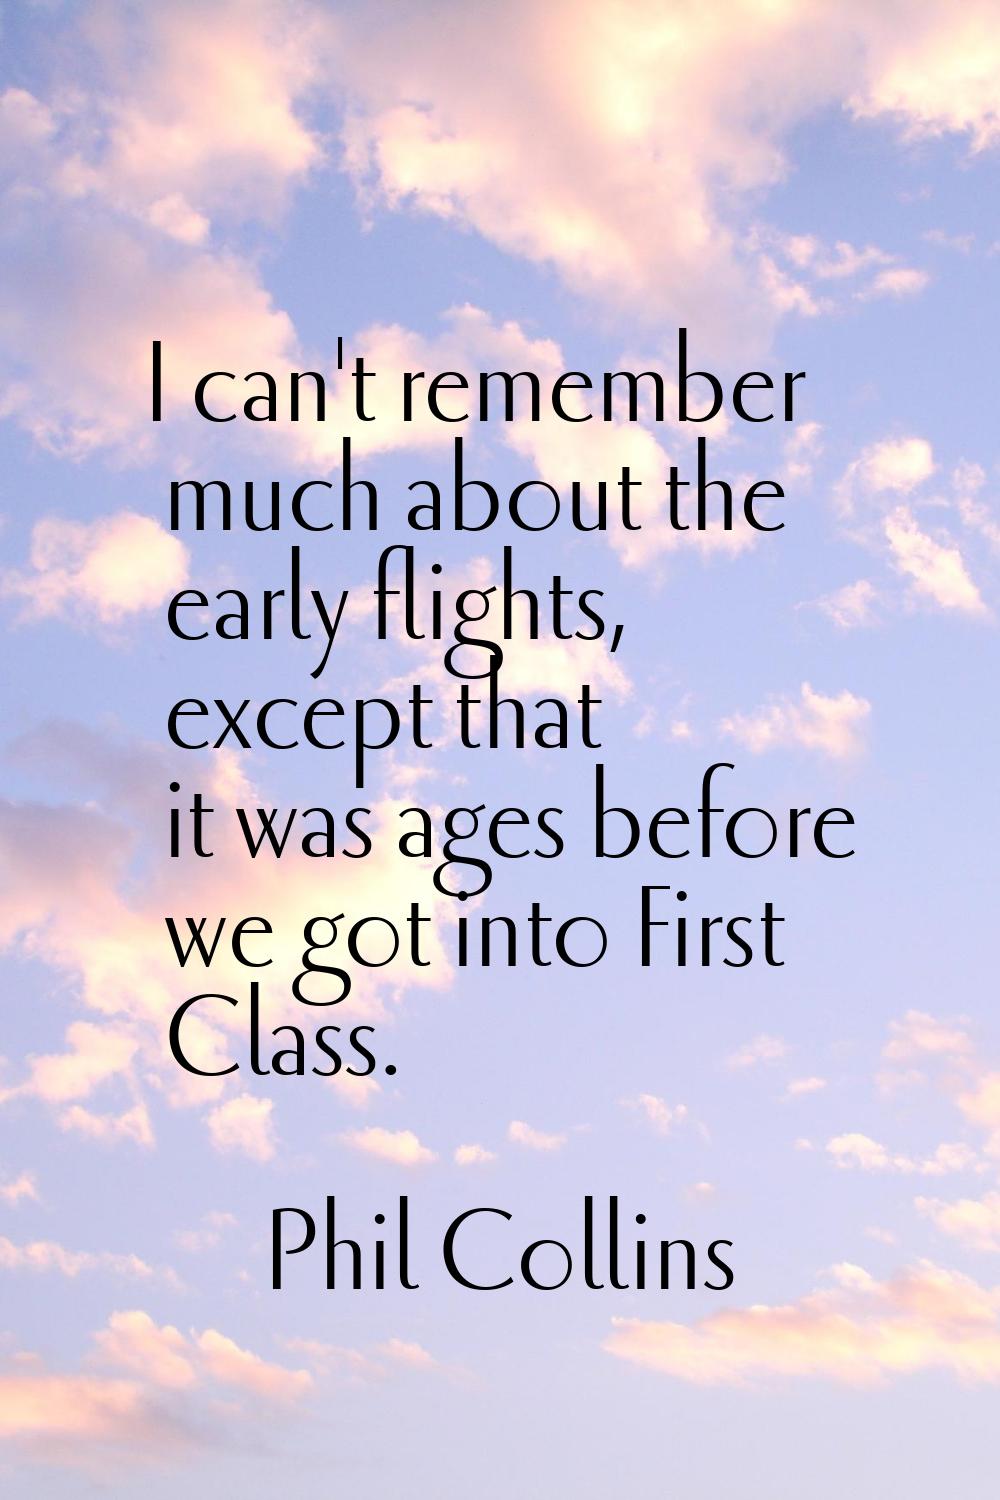 I can't remember much about the early flights, except that it was ages before we got into First Cla